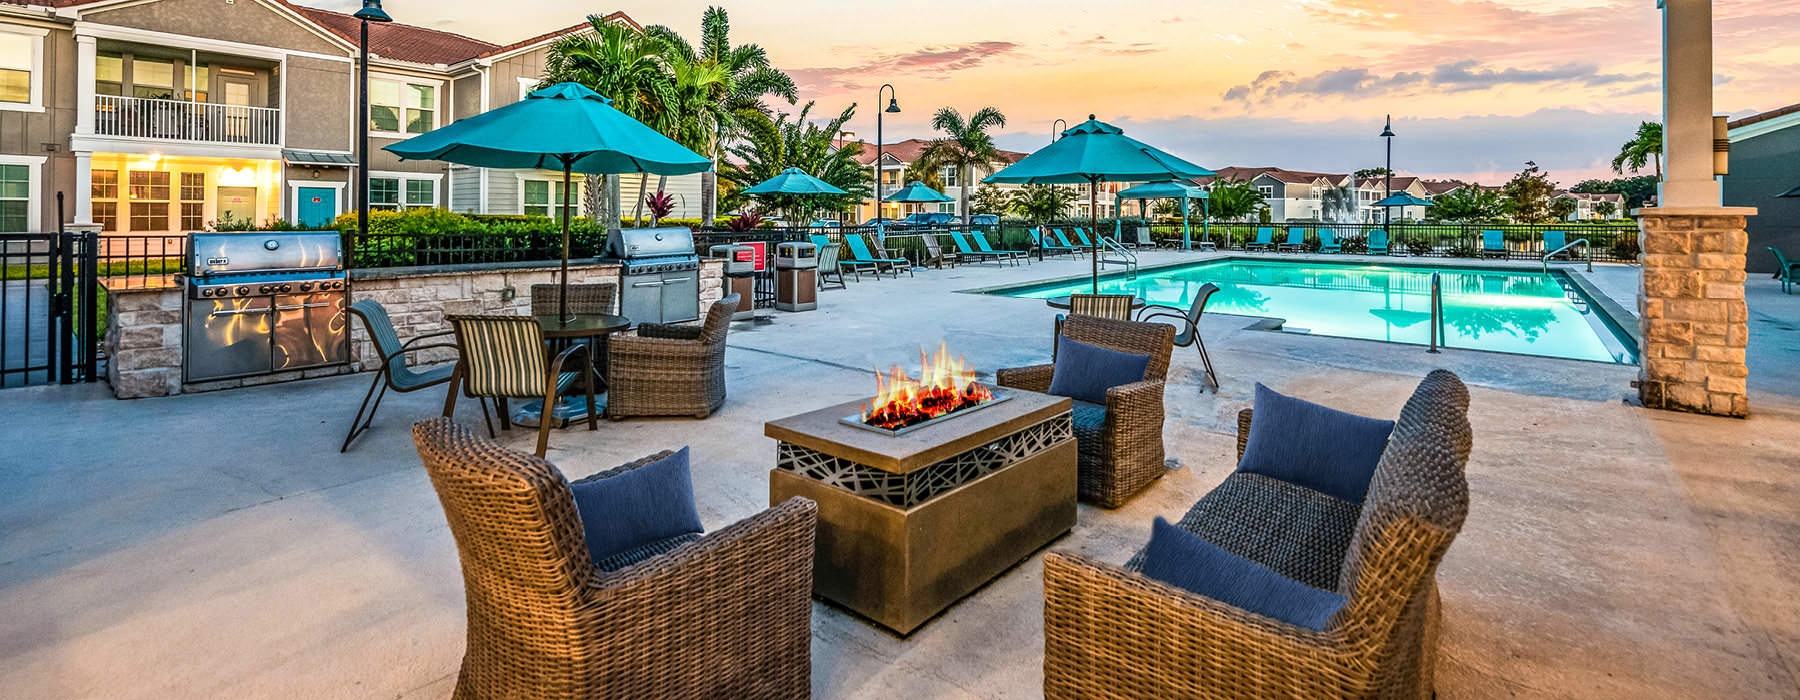 wicker chairs around outdoor fire pit near pool